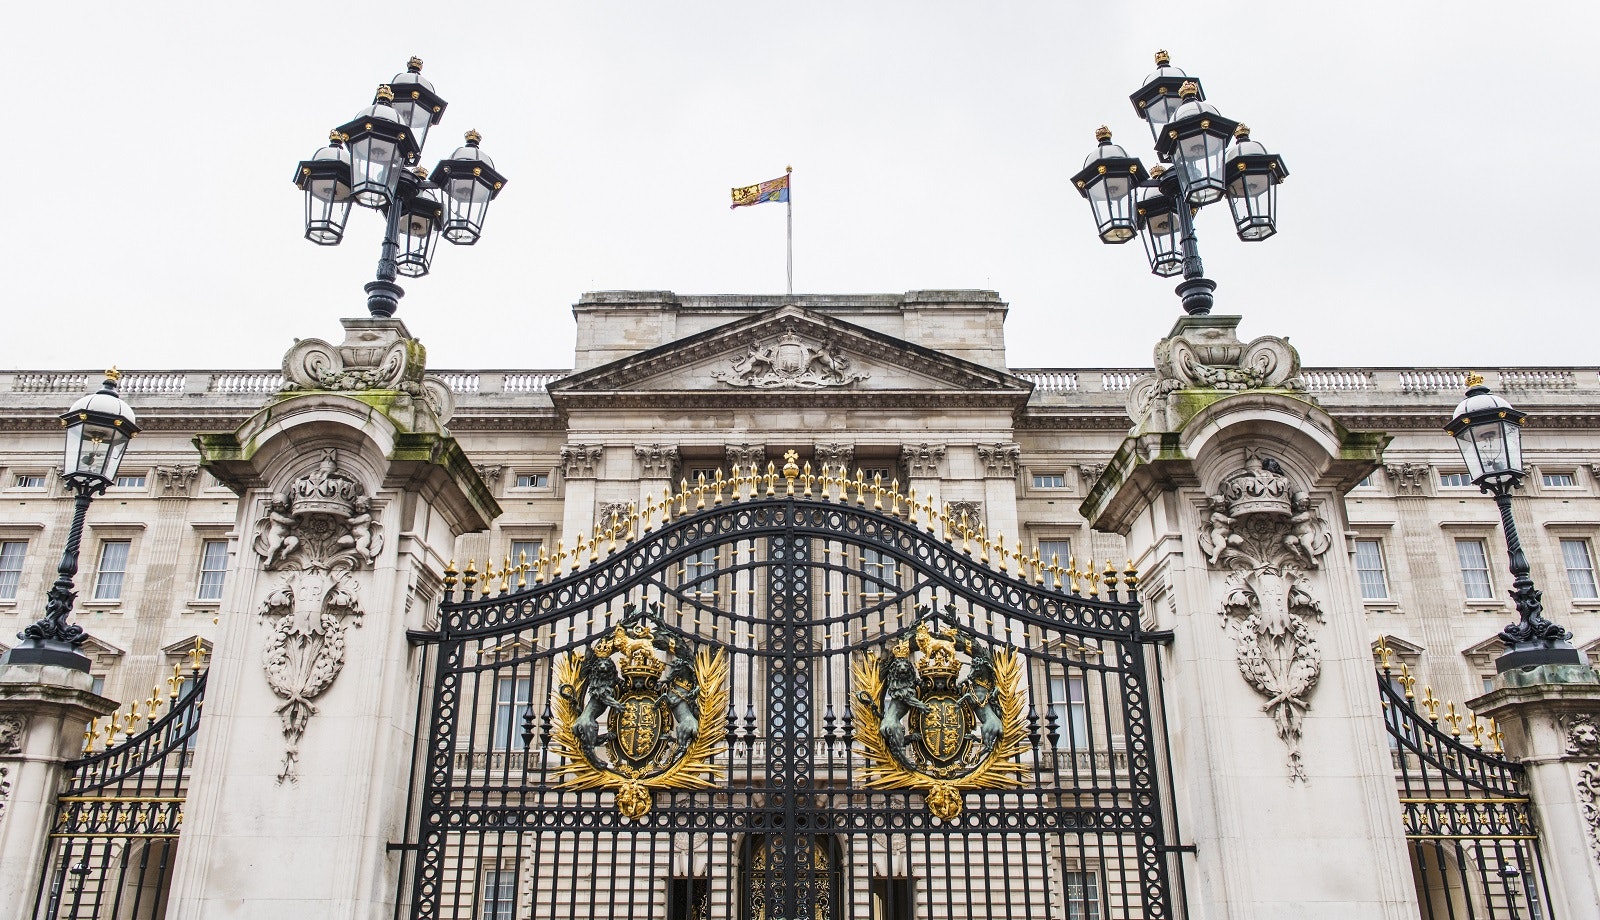 A close-up image of the wrought-iron gates at Buckingham Palace, with the white geometric palace stretching out either side in the background